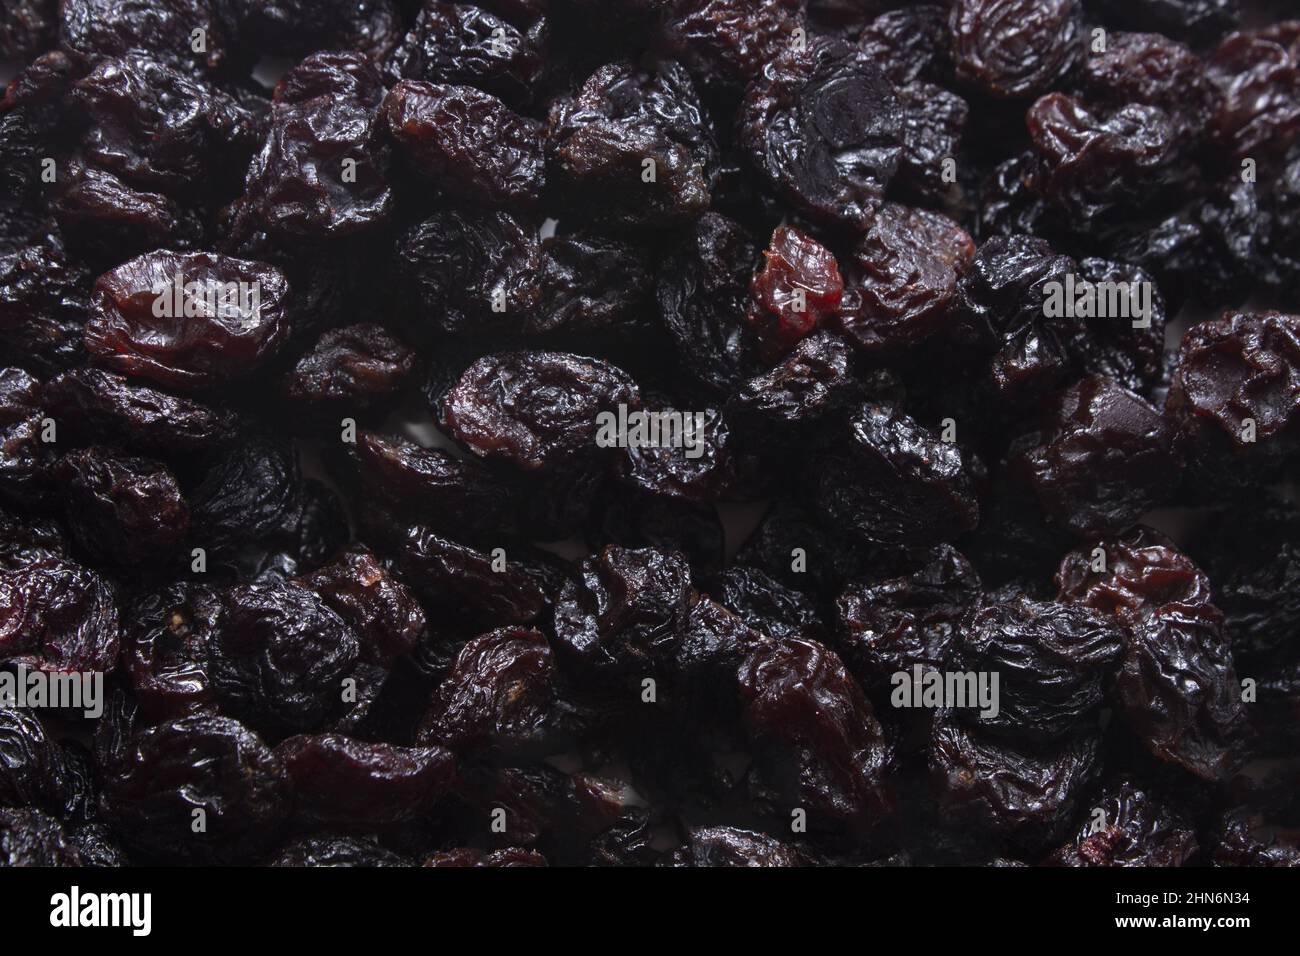 some healthy sun dried raisins, view from above Stock Photo